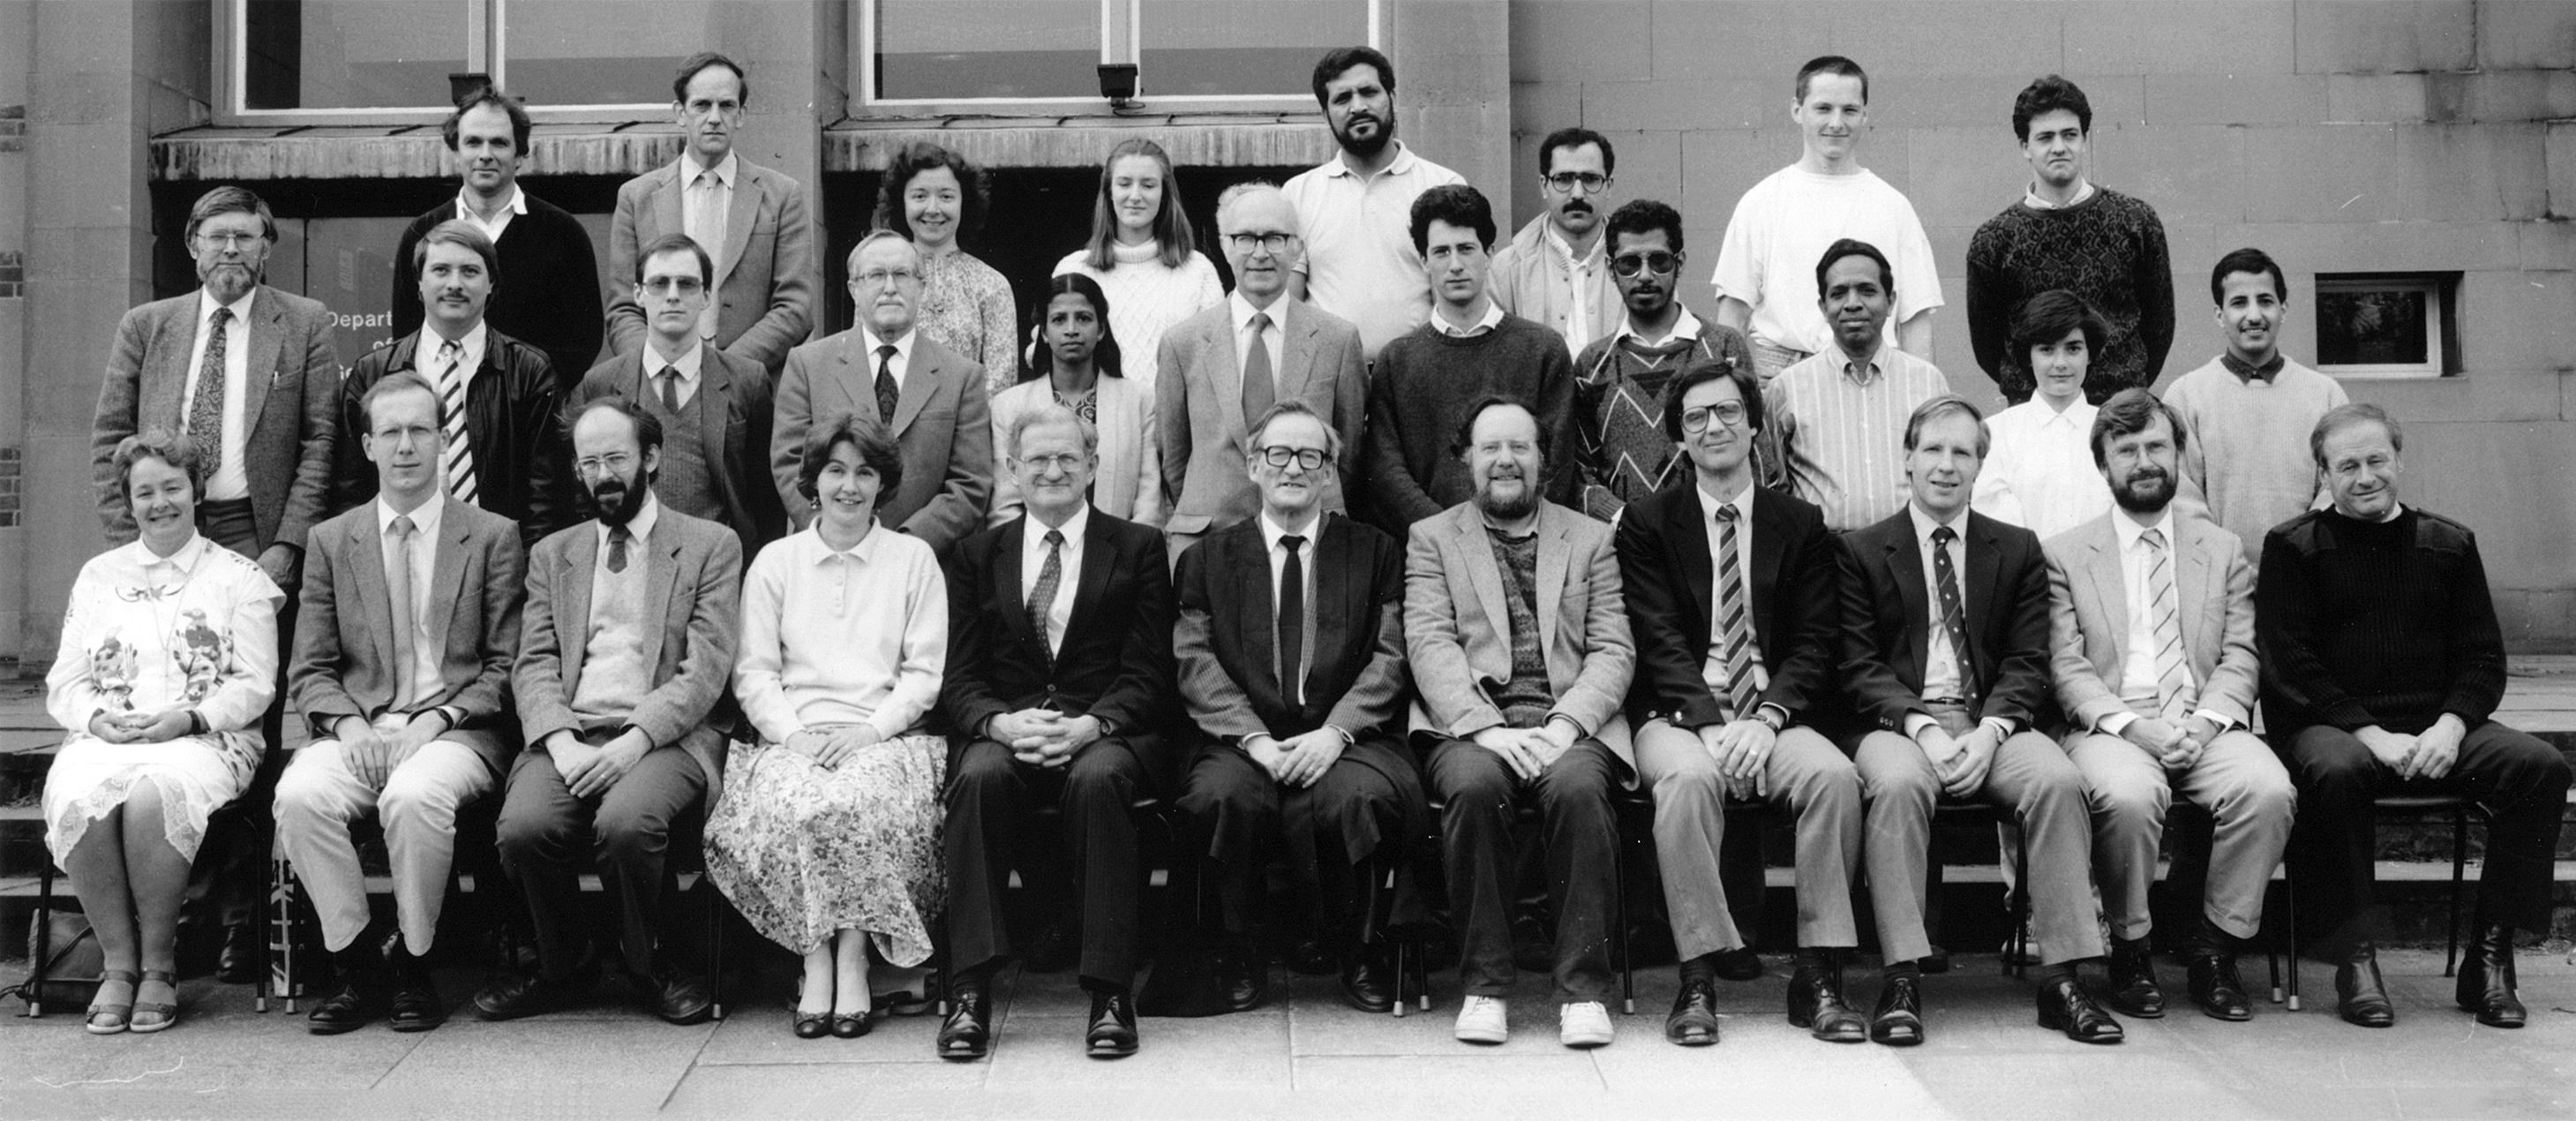 Geography Department Postgraduate Group Photo from 1989